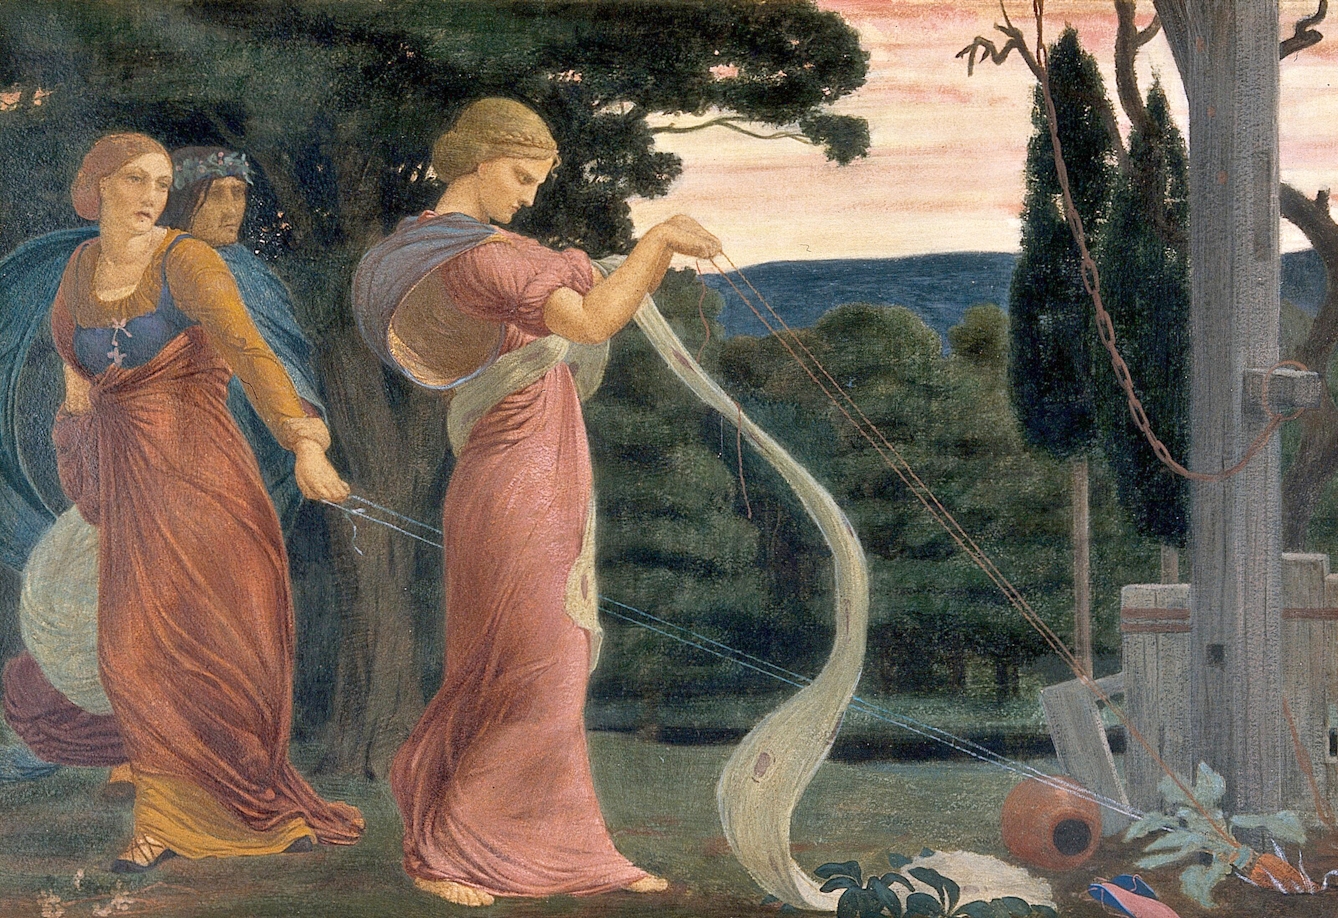 Three women (witches) in flowing robes pulling a mandrake plant out of ground using long cords attached to the plant, which is growing at the foot of a gallows